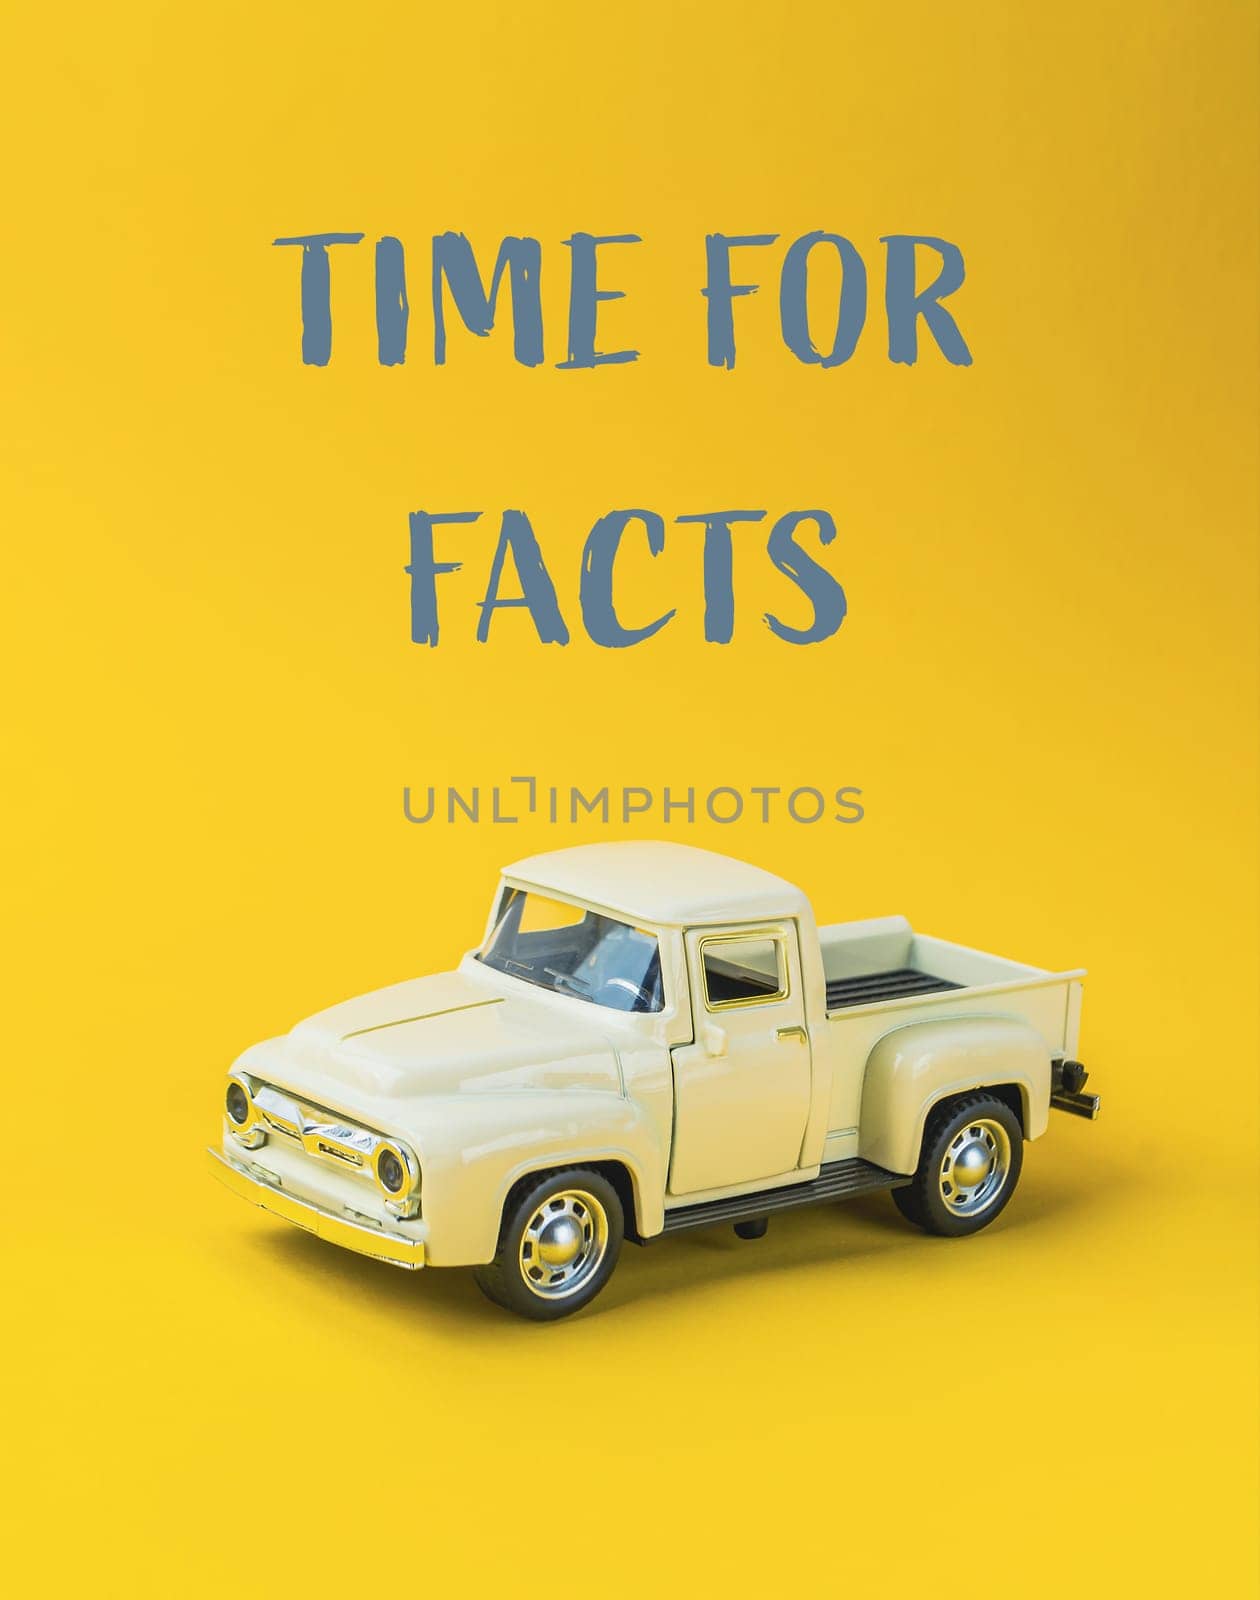 A toy truck is sitting on a yellow background with the words Time for Facts written below it